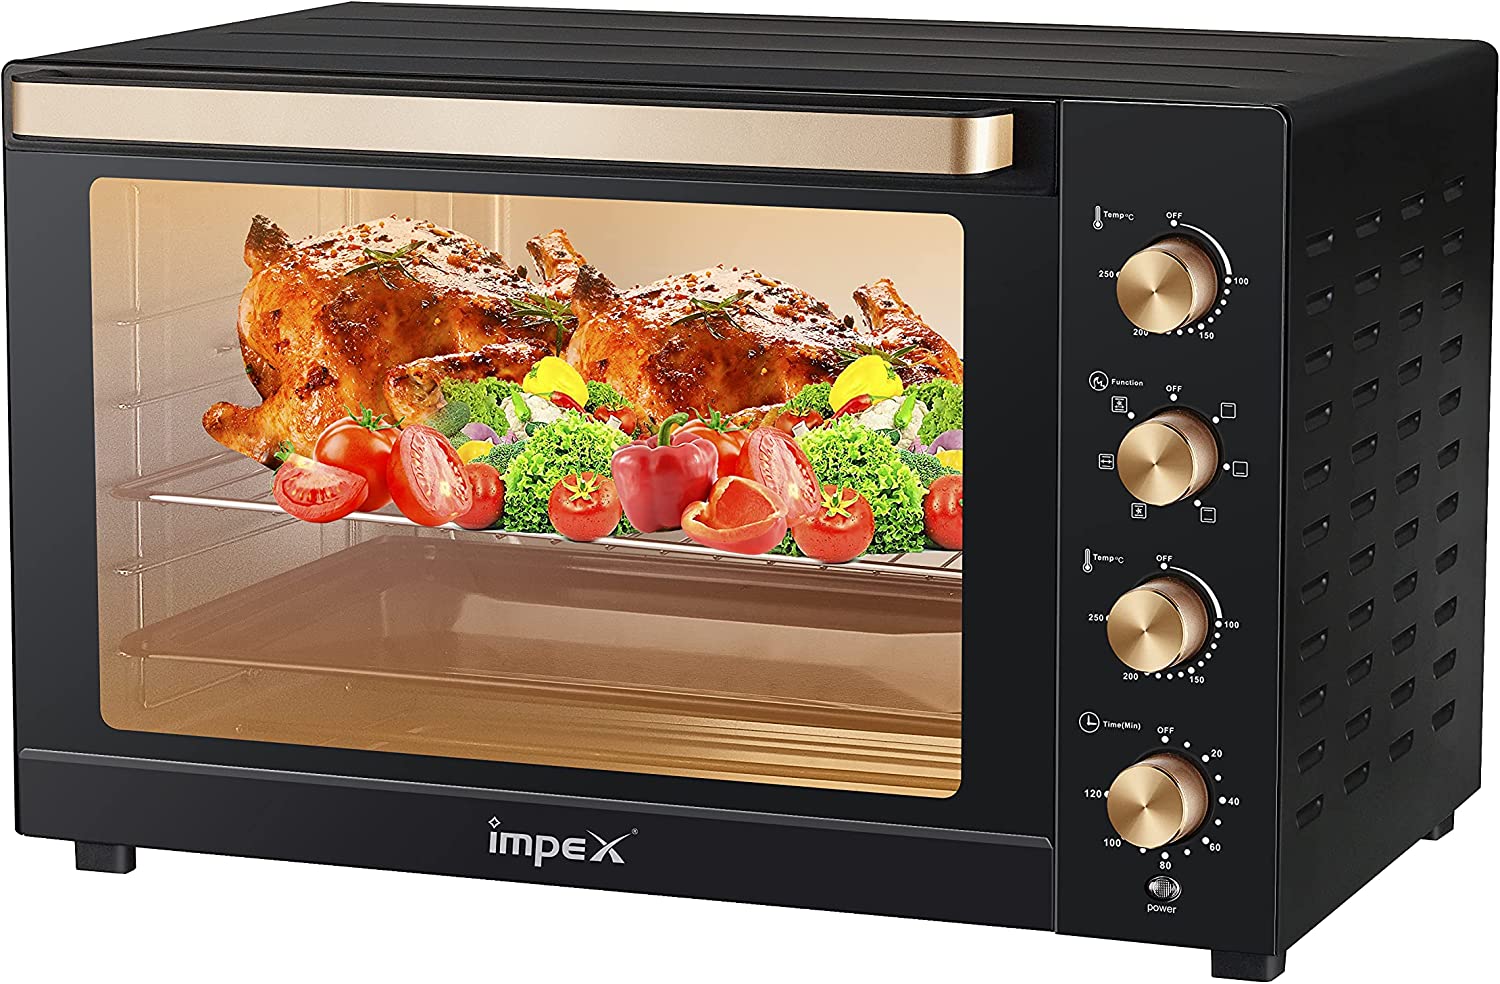 Impex OV 2905 2800W 120L Electric Oven with Temperature Adjustment Rotisserie Function Timer Control Knobs, Black